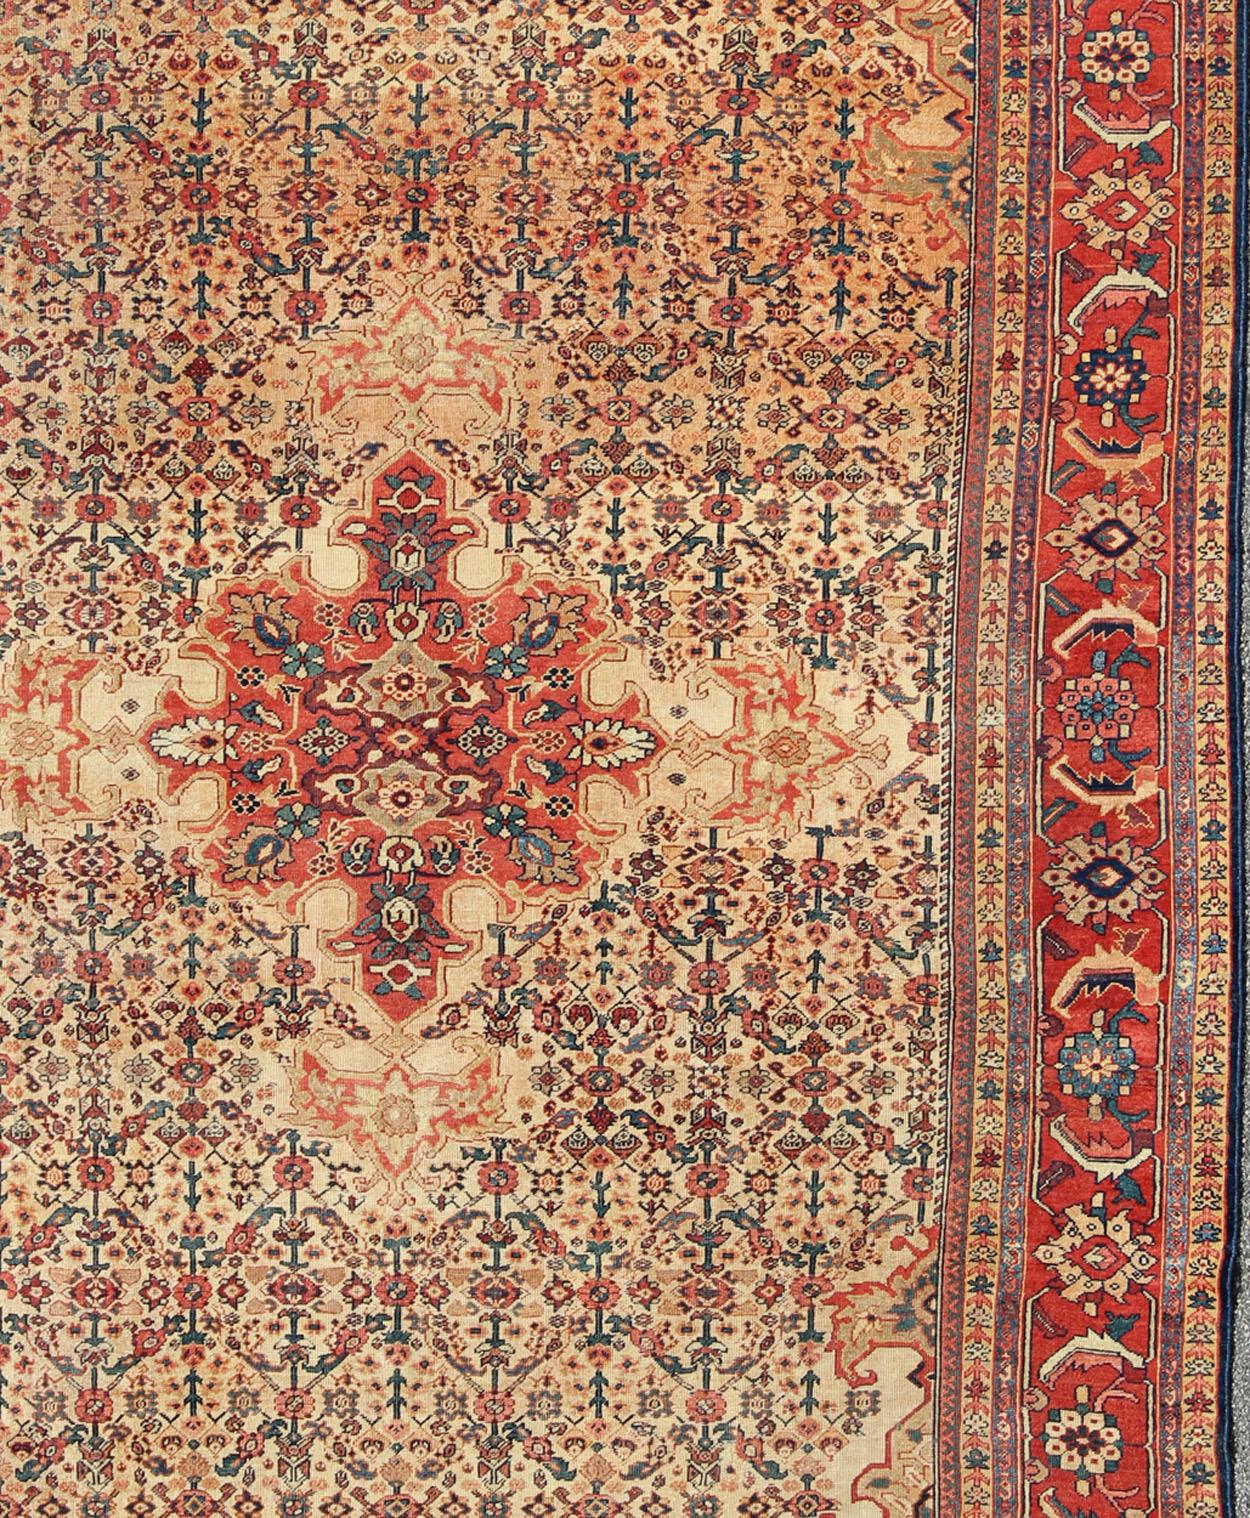   Antique Persian Sultanabad with Medallion in Yellow Cream, Blue Red and Green

Measures: 8'10” x 12'4”

Antique Persian Sultanabad Rug, Keivan Woven Arts: rug/ G-0405; Country of Origin: Iran; Type: Sultanabad; Design: Floral, Medallion.

This